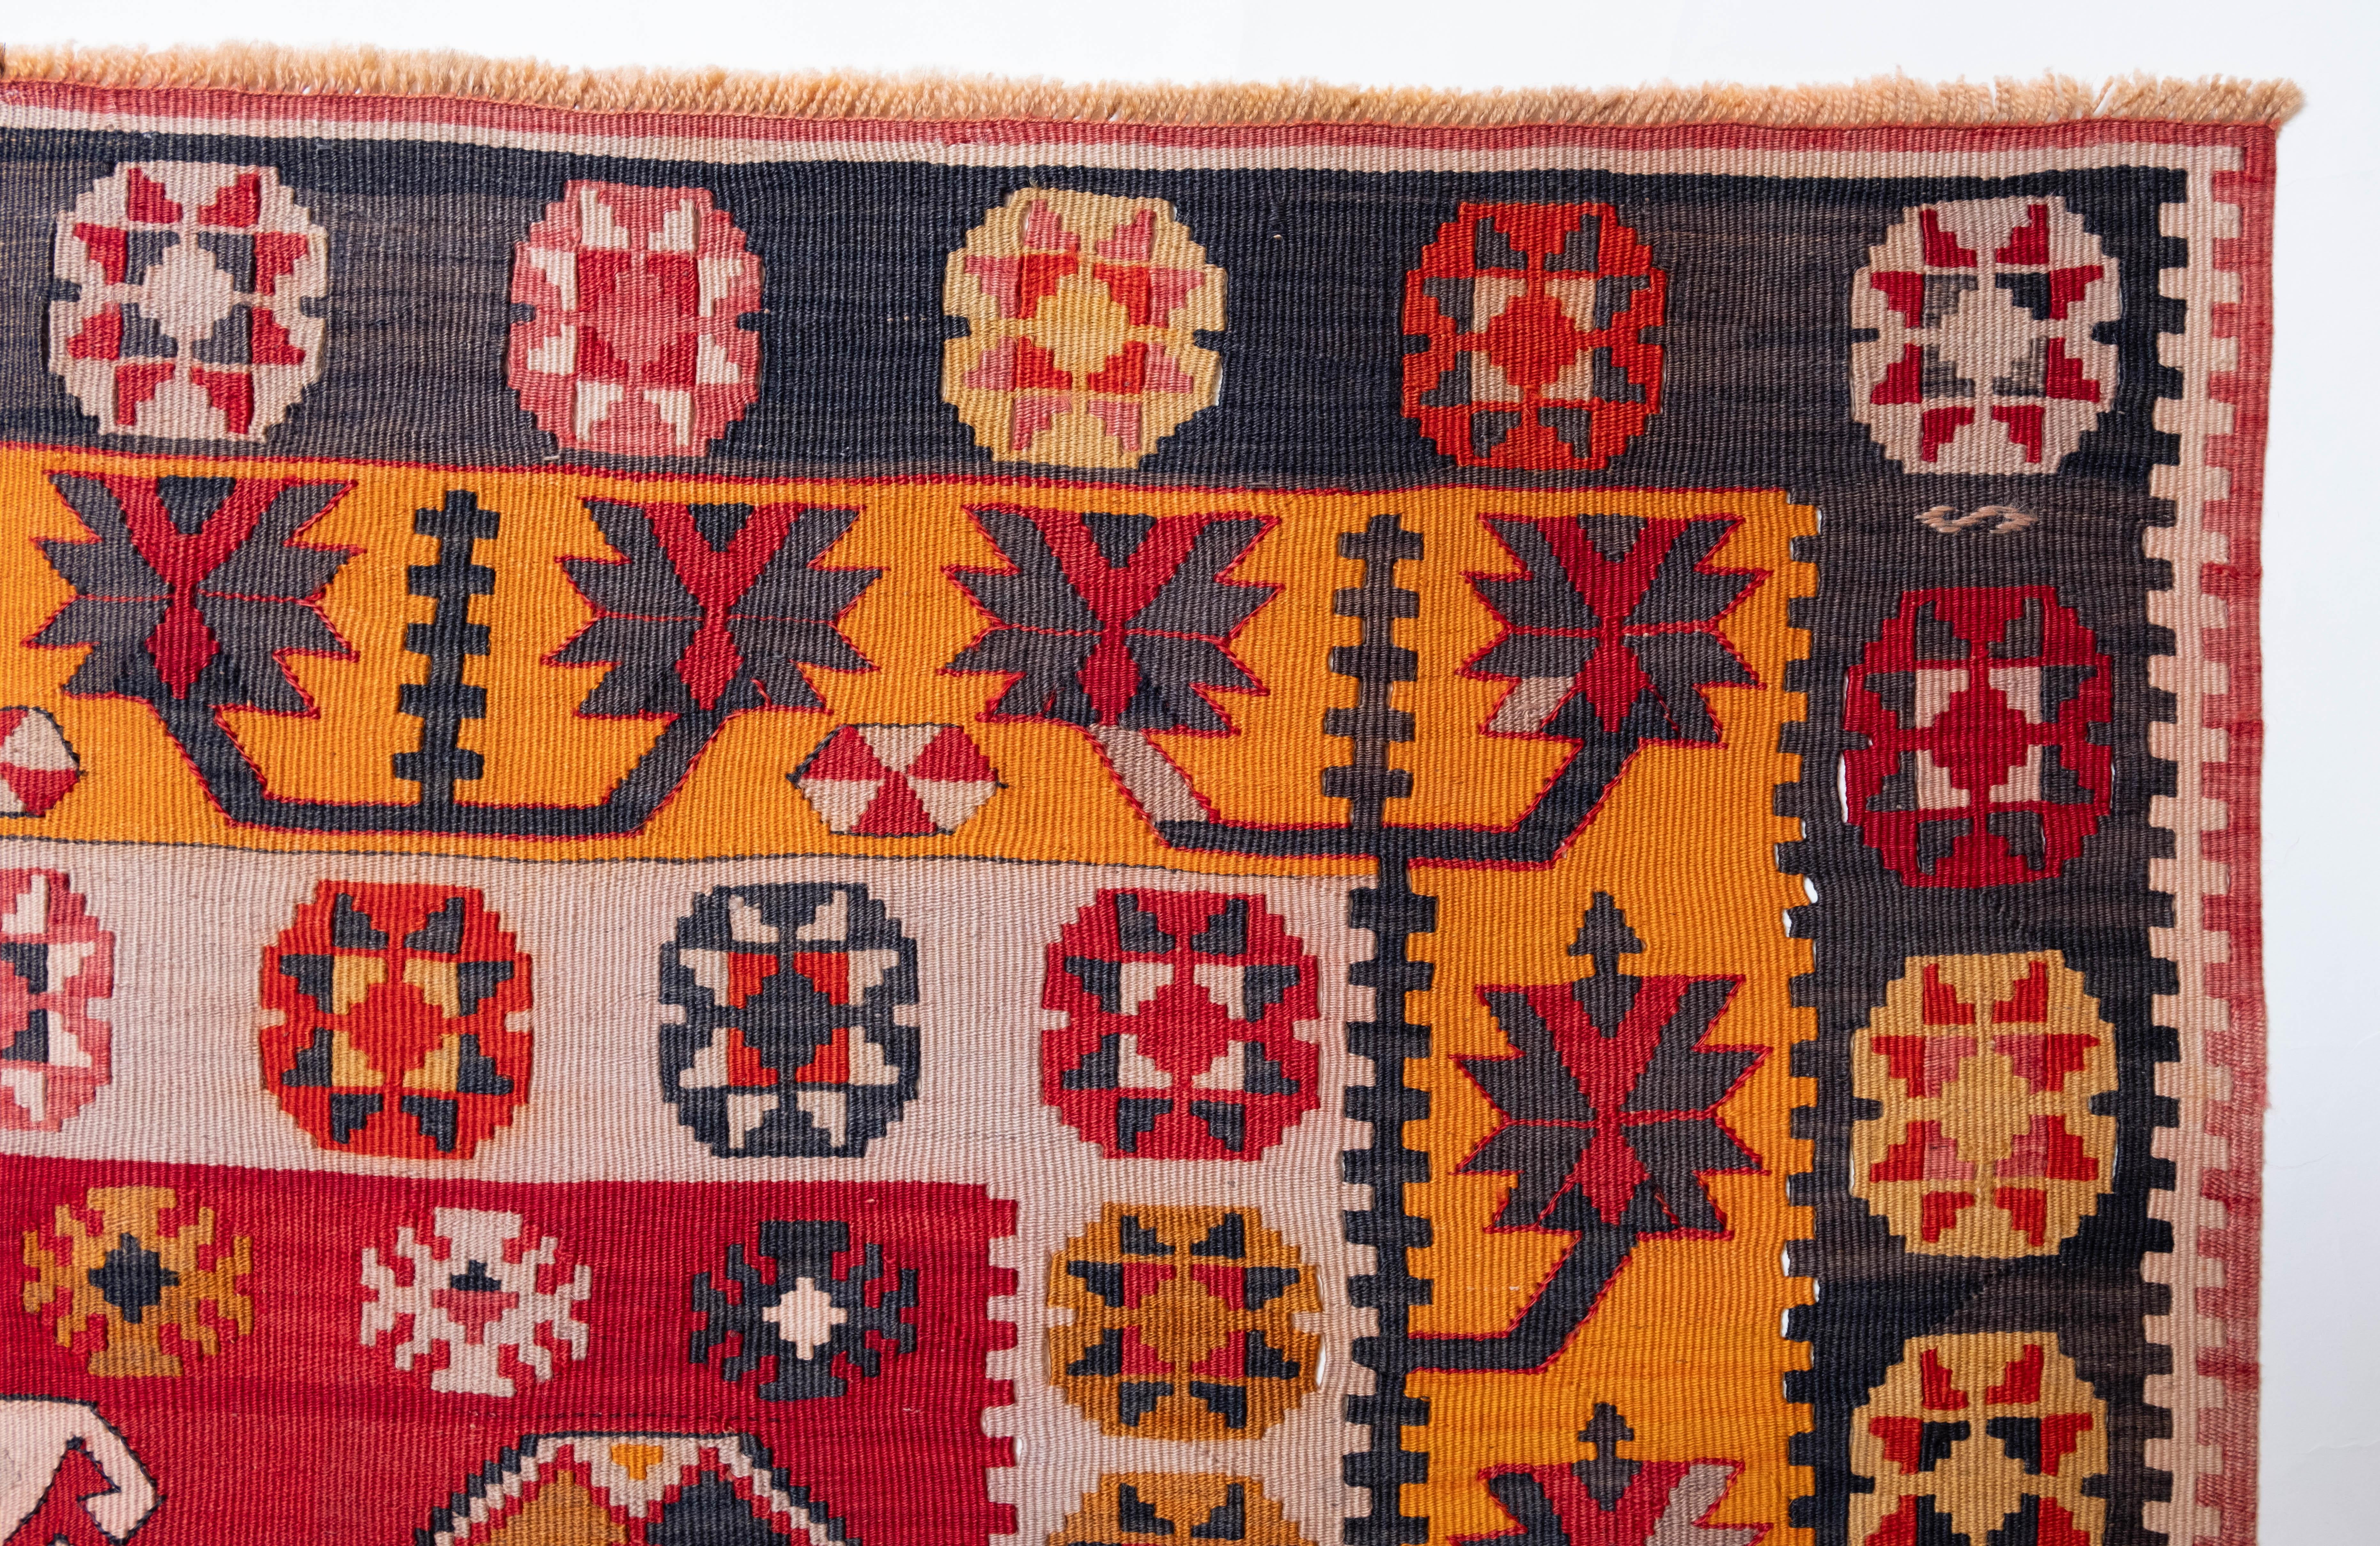 This is Central Anatolian Antique Kilim from the Corum region with a rare and beautiful color composition.

This highly collectible antique kilim has wonderful special colors and textures that are typical of an old kilim in good condition. It is a